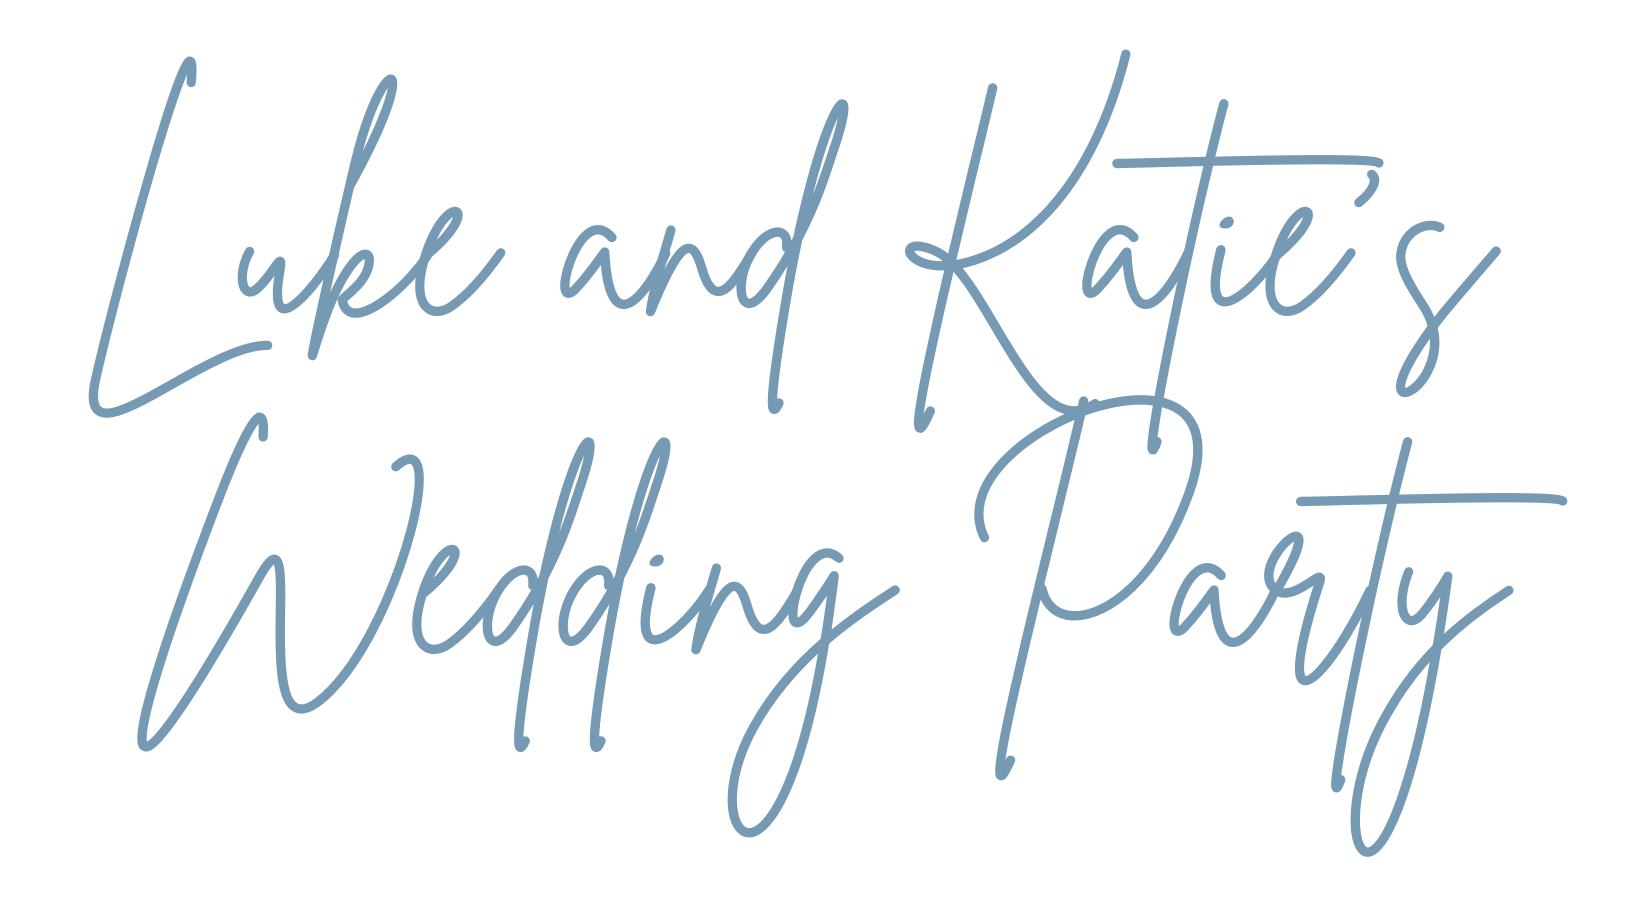 The Wedding Website of Catherine Jean Hoben and Lukas Randall LePage